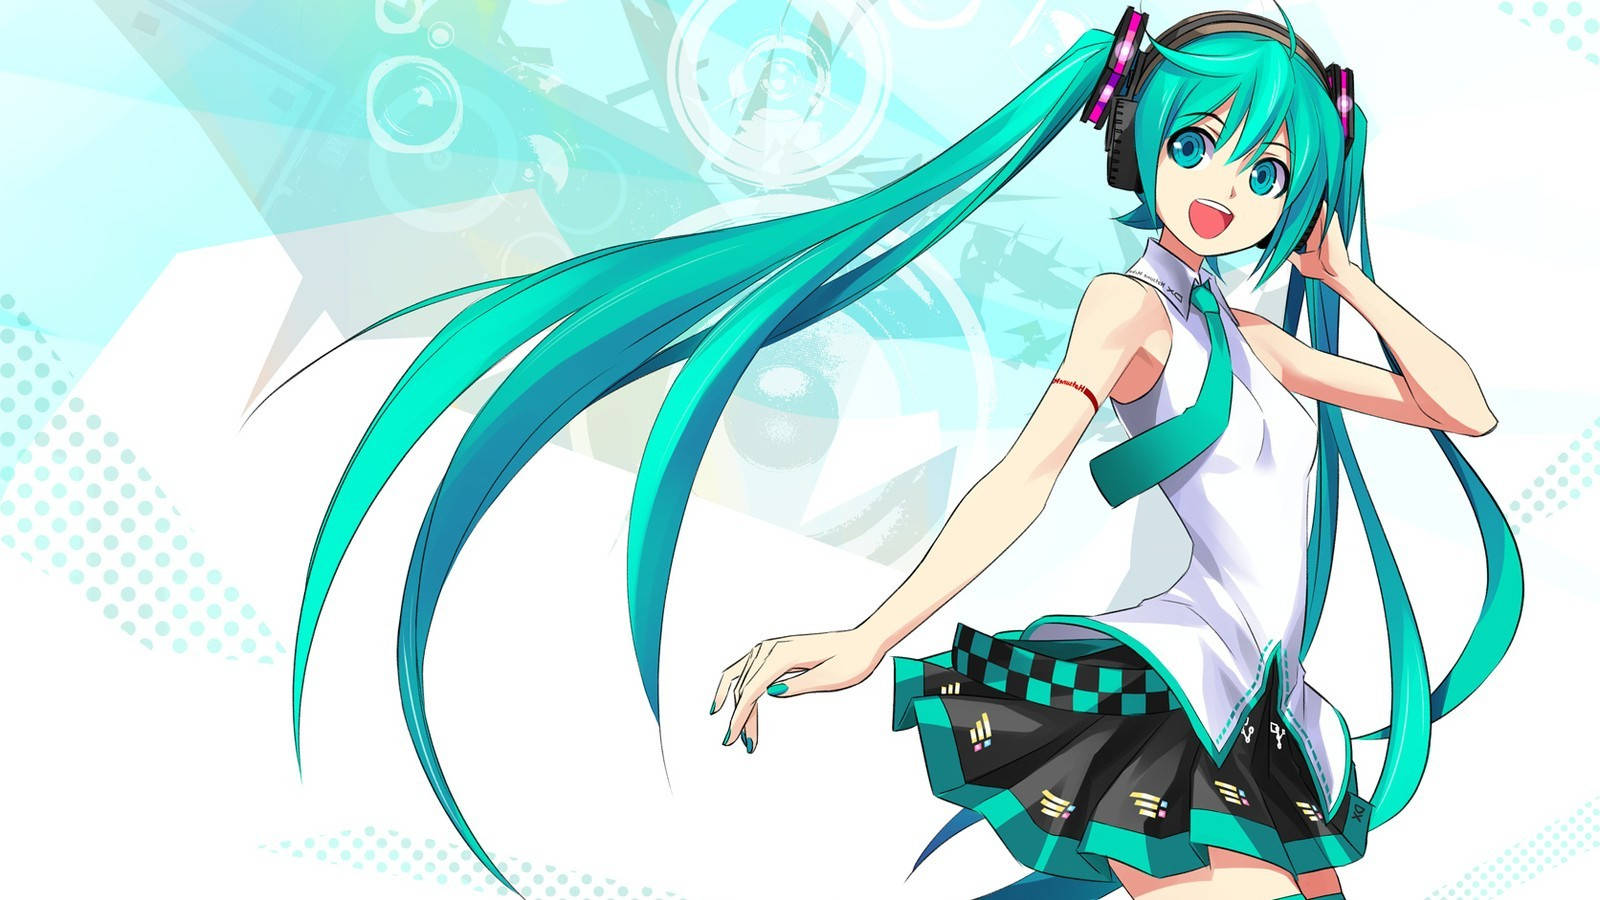 Vocaloid Takes Center Stage